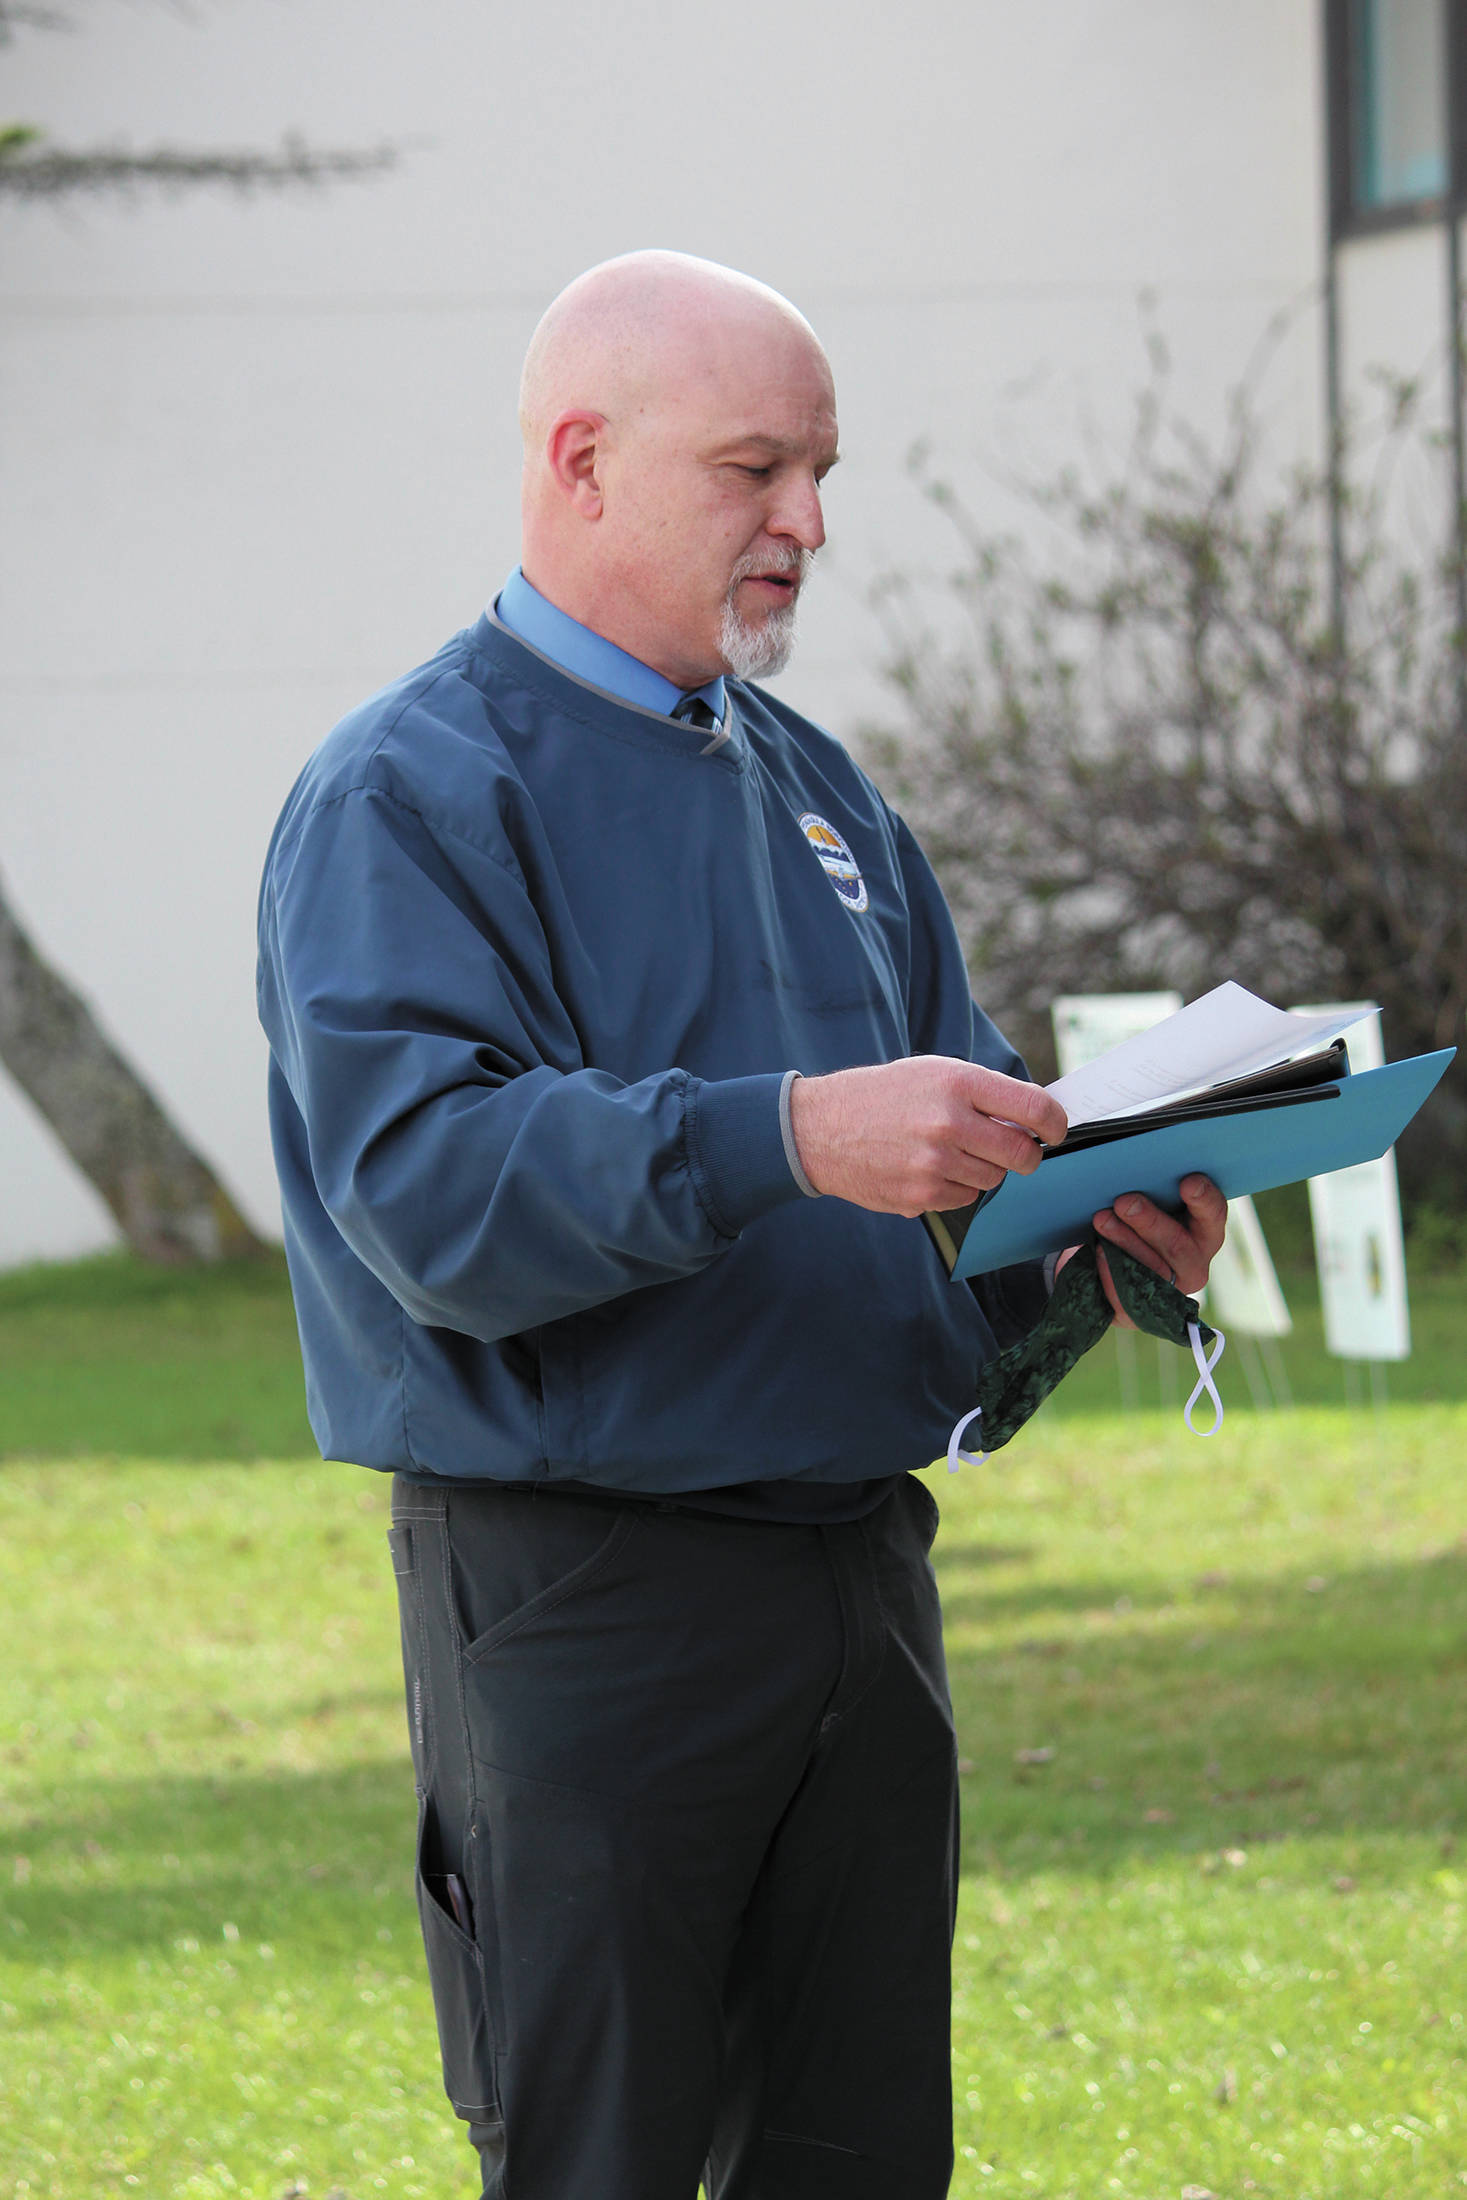 Ninilchik School Principal Jeff Ambrosier reads the scholarships graduates received during an alternative graduation ceremony outside the school Wednesday, May 20, 2020 in Ninilchik, Alaska. (Photo by Megan Pacer/Homer News)